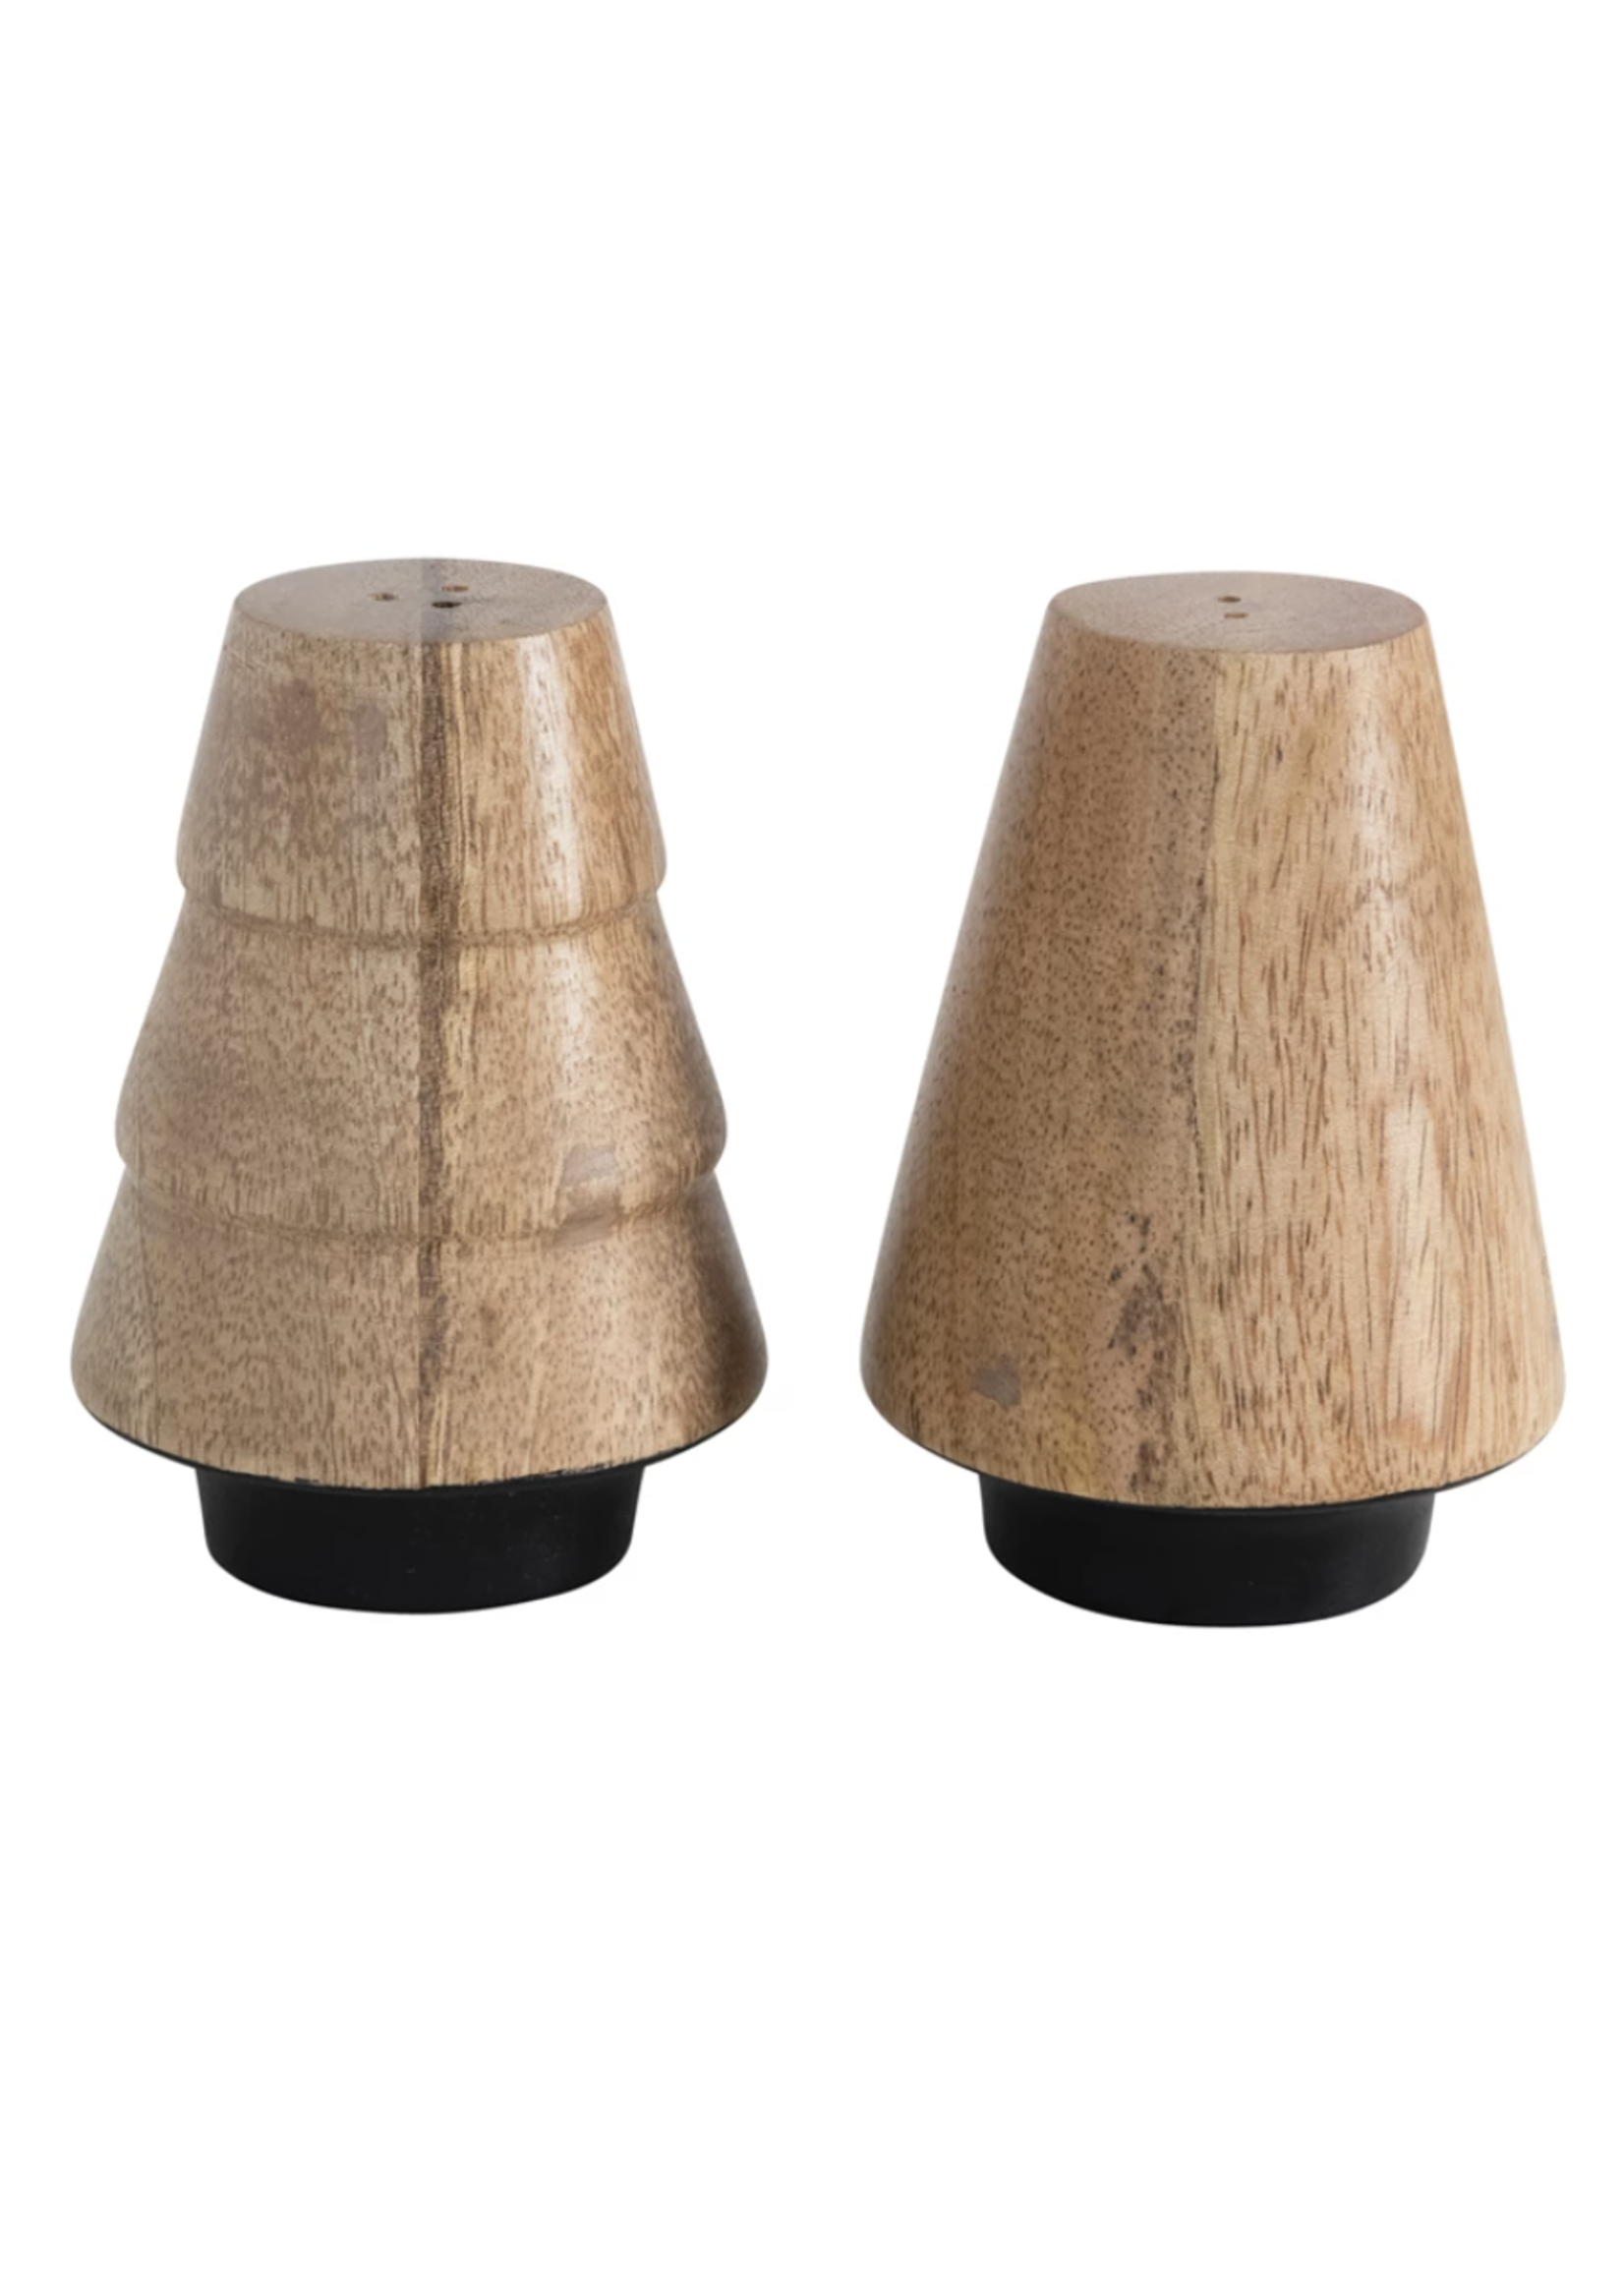 Hand-Carved Mango Wood Salt and Pepper Shakers, Set of 2